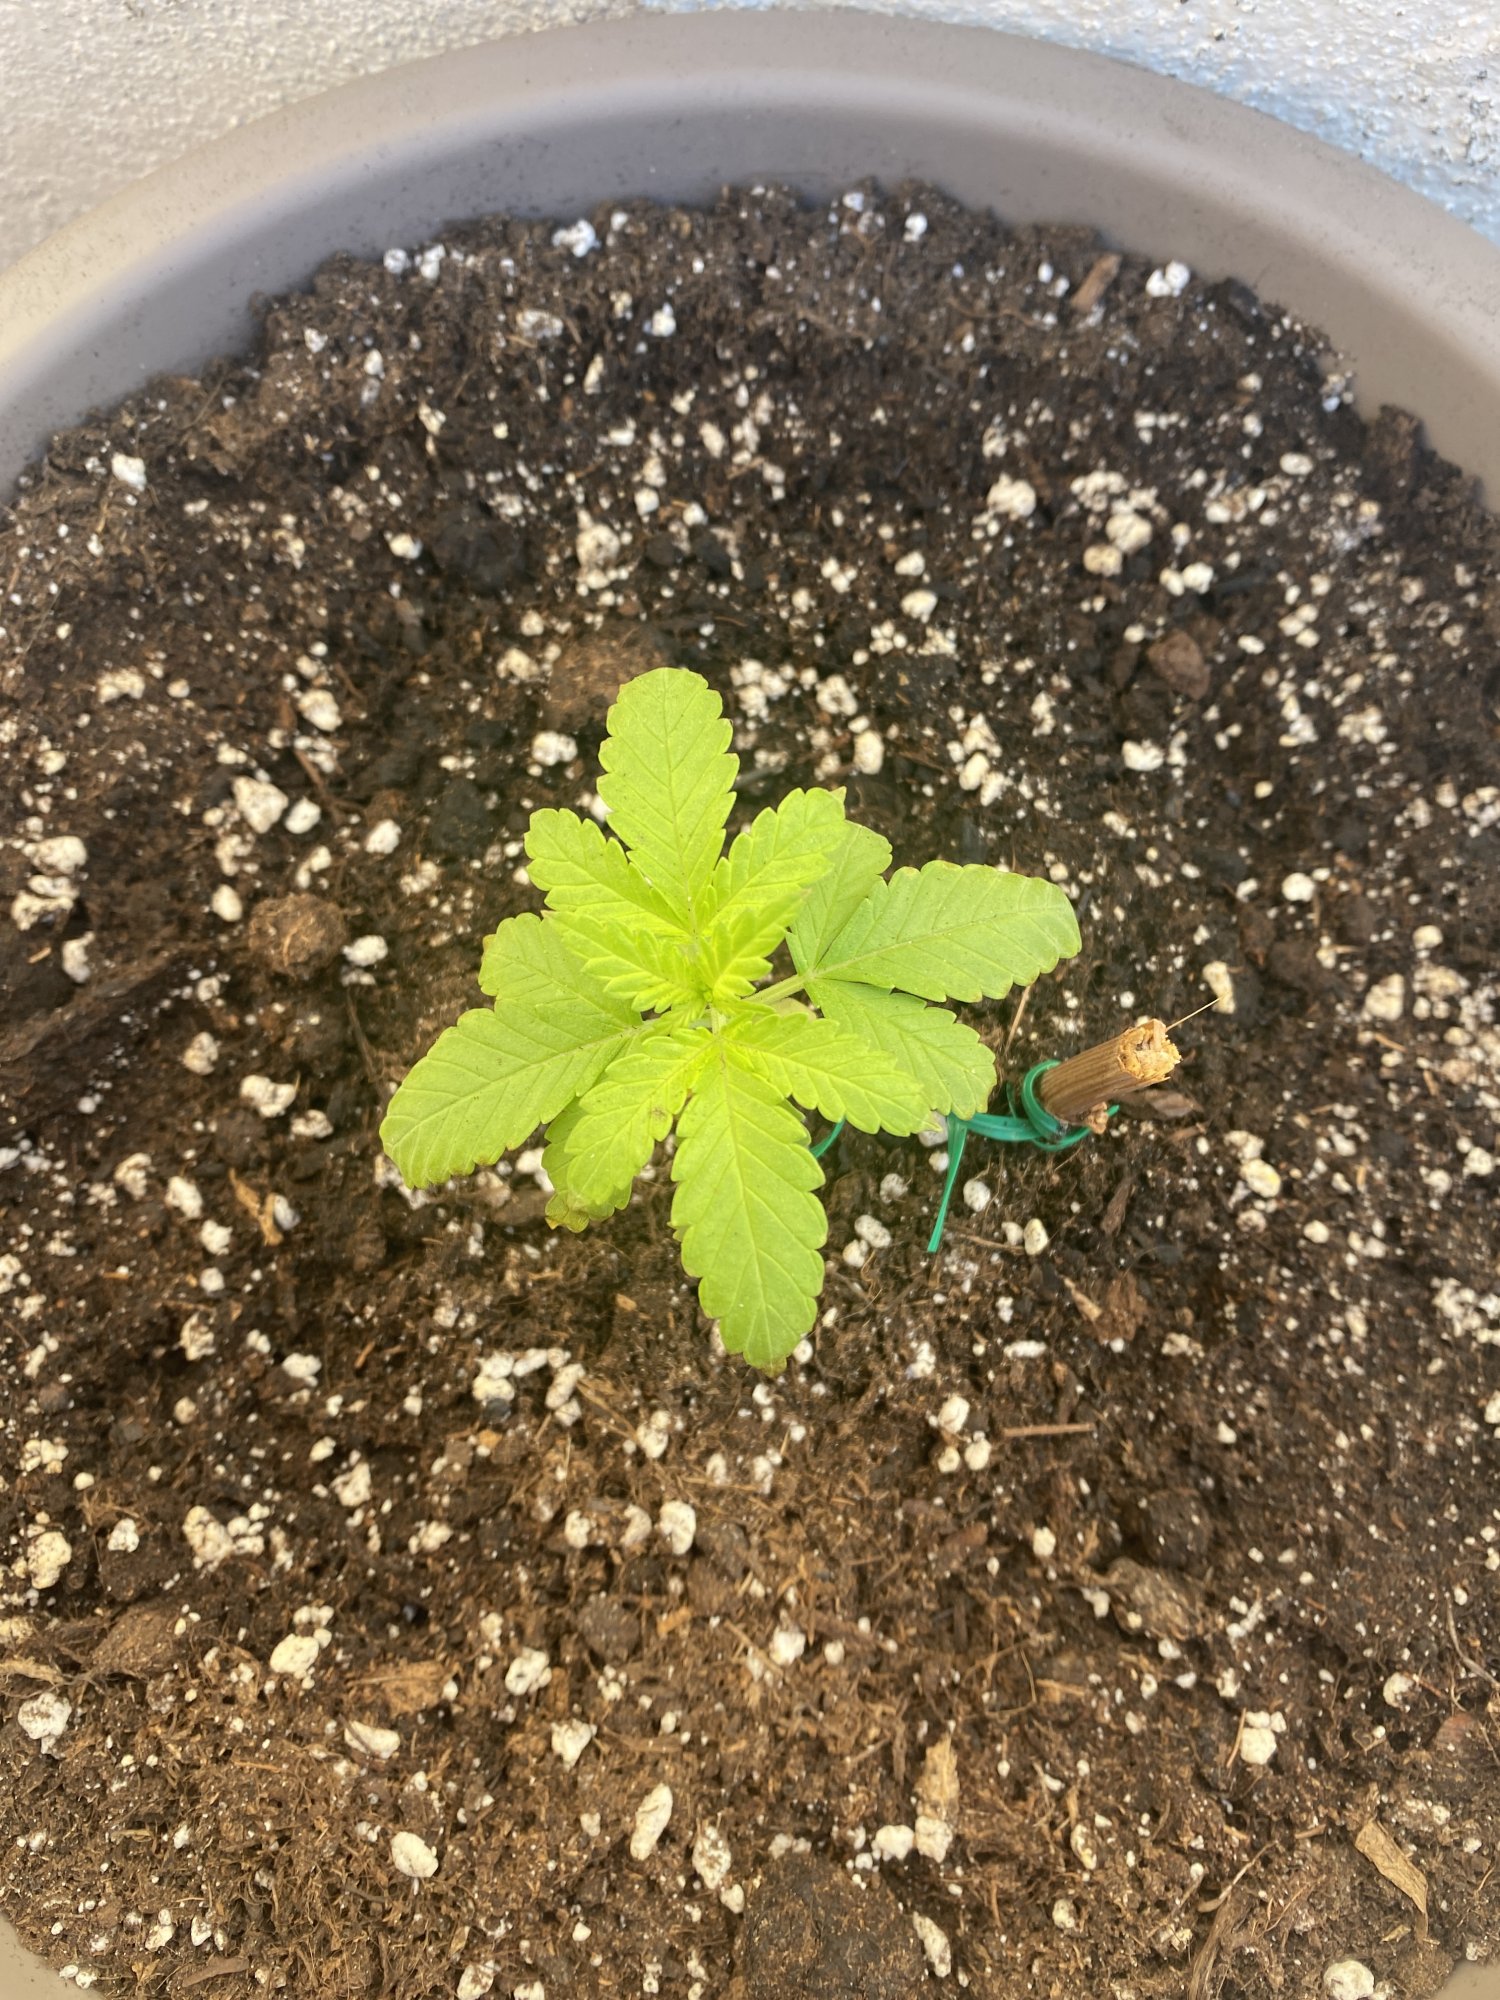 What is going wrong with my plants 5